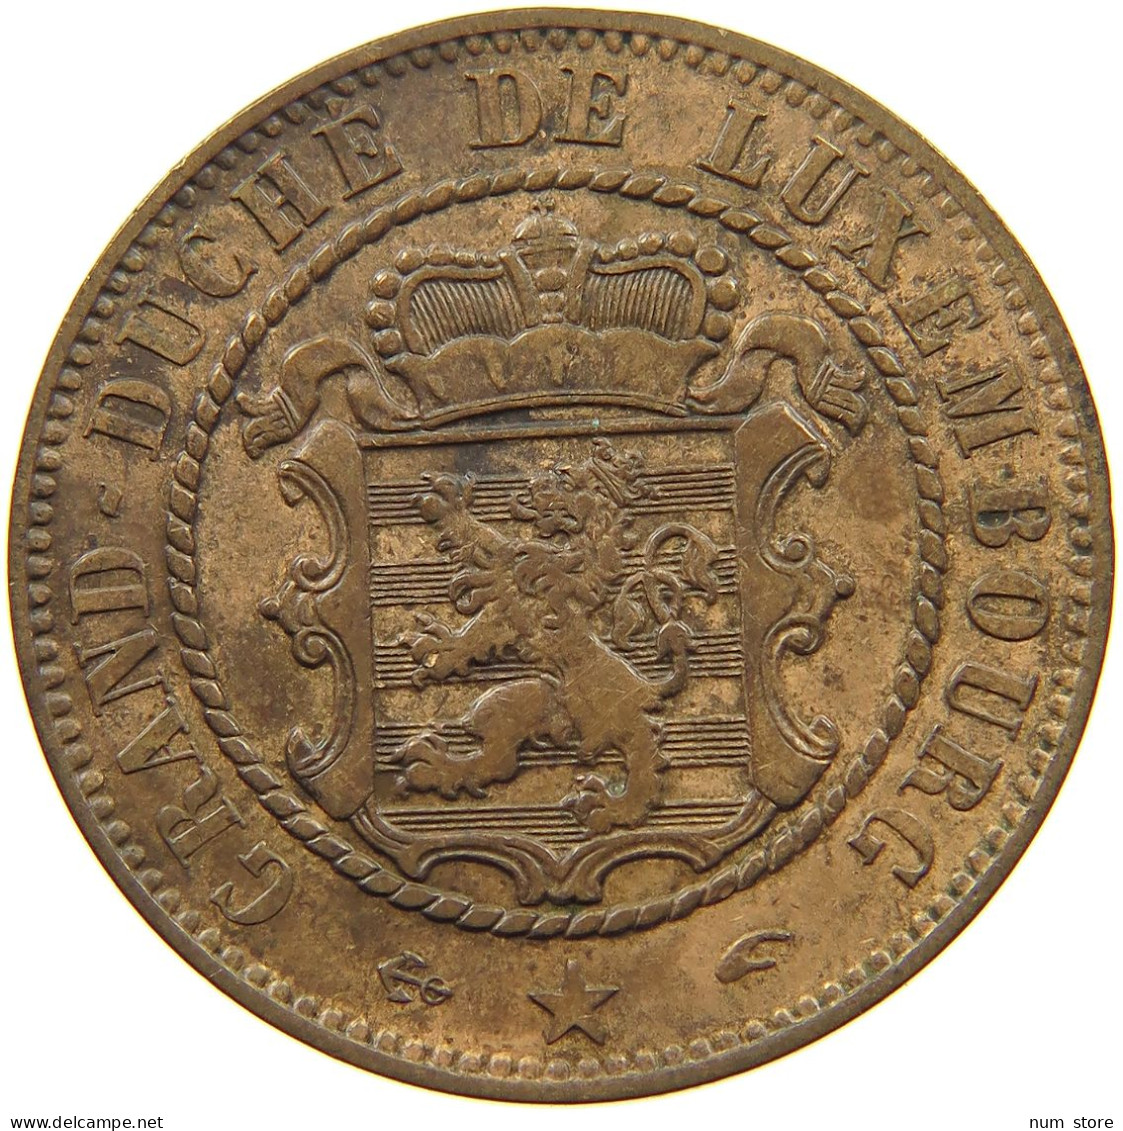 LUXEMBOURG 10 CENTIMES 1855 A Willem III. 1849-1890 #c003 0151 - Luxembourg